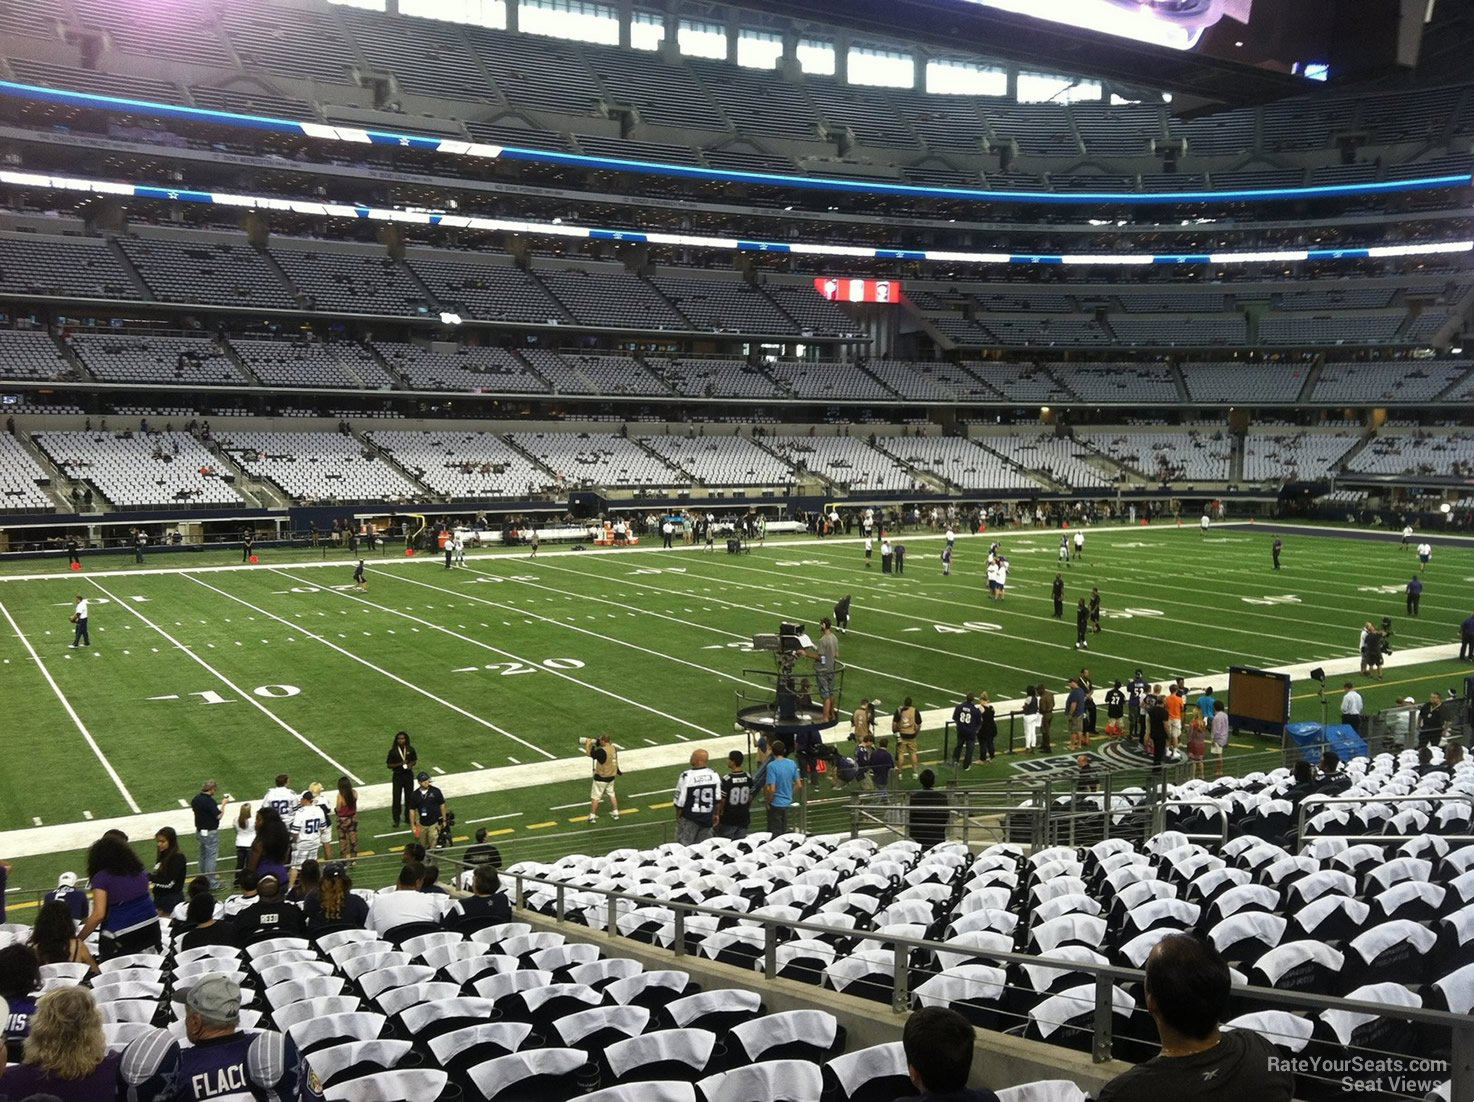 section 142, row 20 seat view  for football - at&t stadium (cowboys stadium)